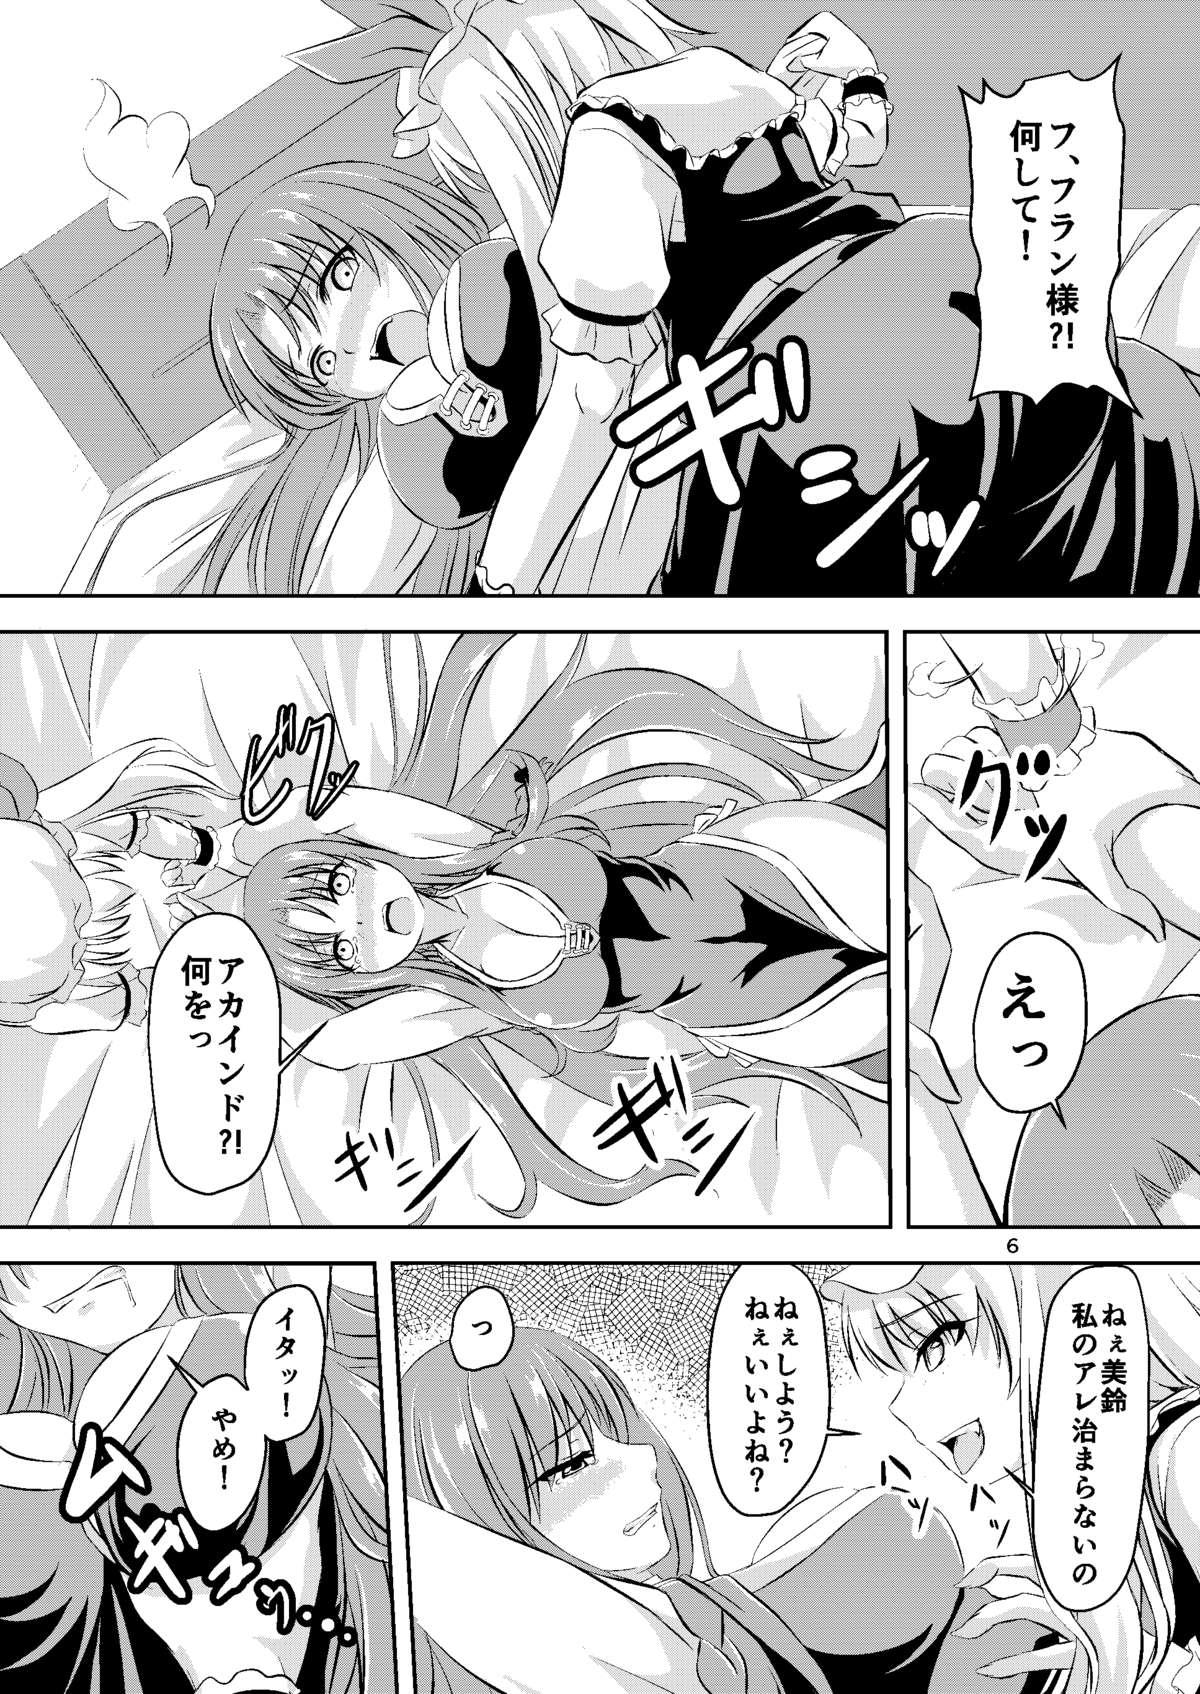 Lezbi 幻想男娘紅魔館!フランドール - Touhou project Pica - Page 4